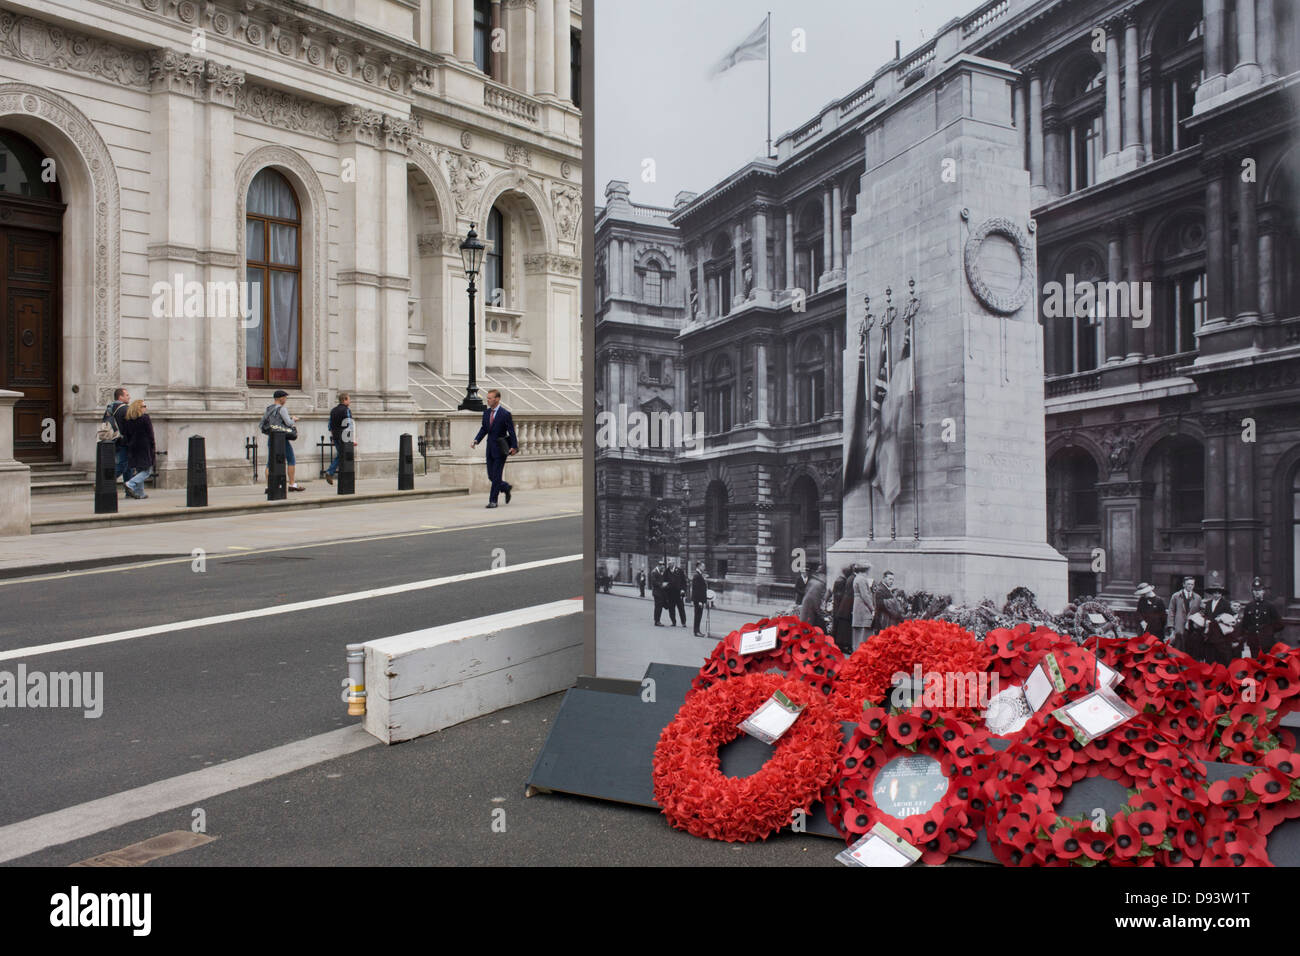 Real remembrance wreaths on the ground at the foot of a black and white vintage era photograph that shows the Cenotaph, currently hiding the real monument being renovated in London's Whitehall. In a landscape of false perspective and confusing juxtapositions between reality and the reproduction of the picture, we see the famous war memorial in central London. Stock Photo